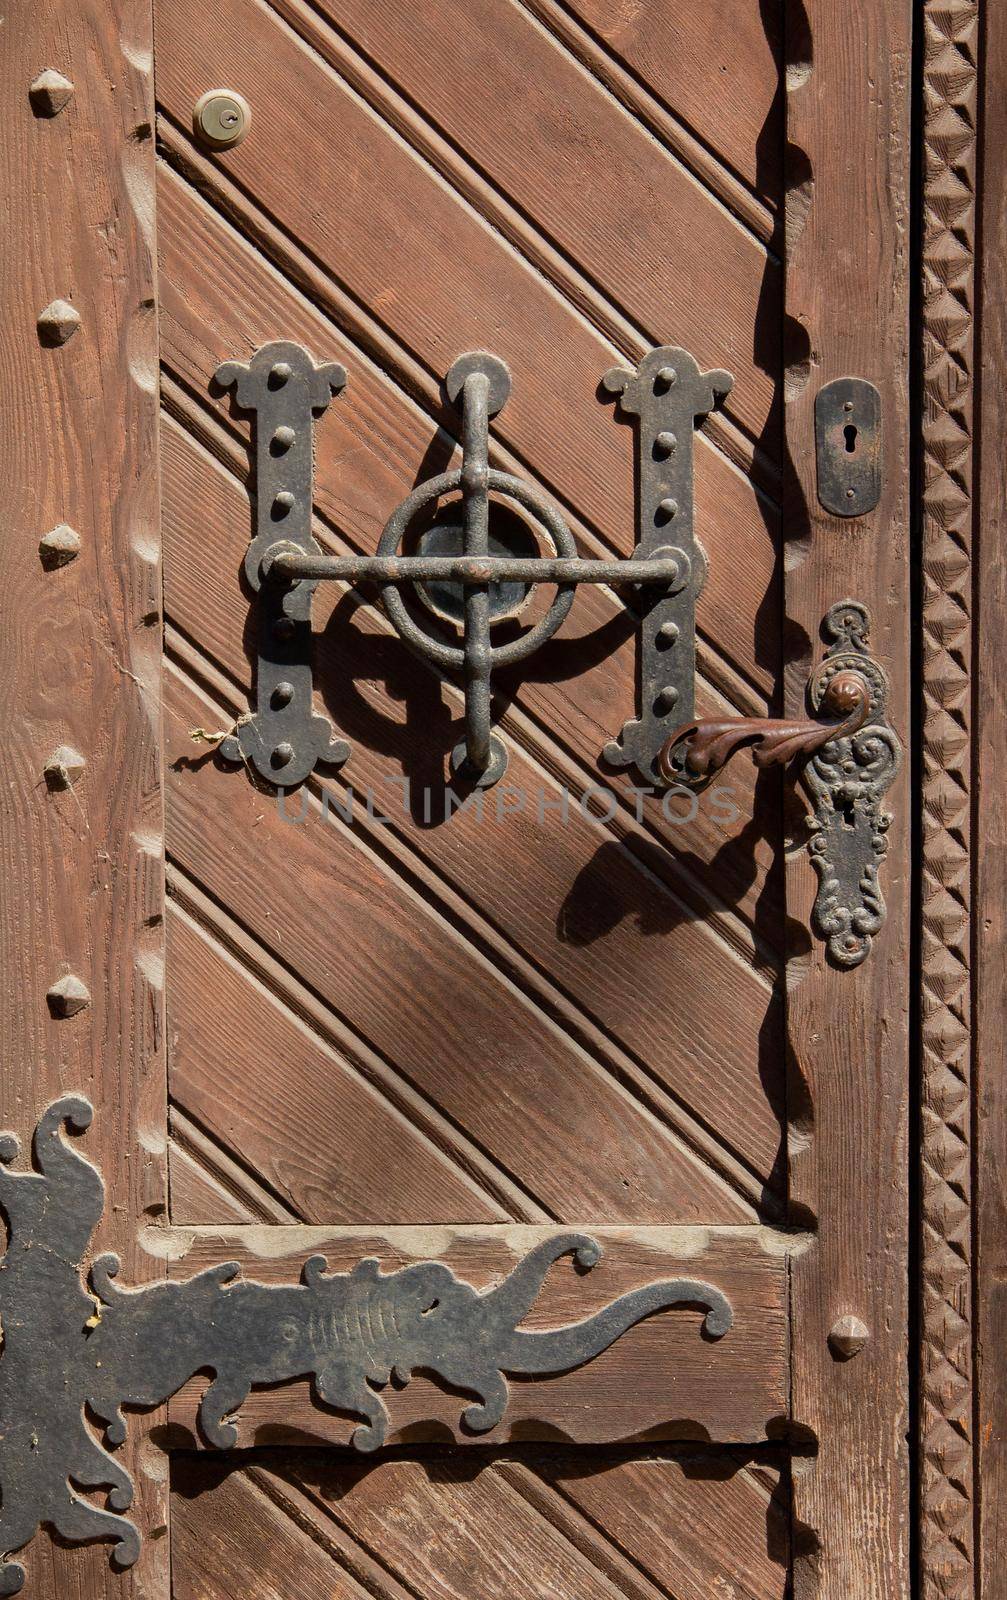 Romanesque castle door handle Vajdahunyad Castle on the Pest side of Budapest by gallofoto